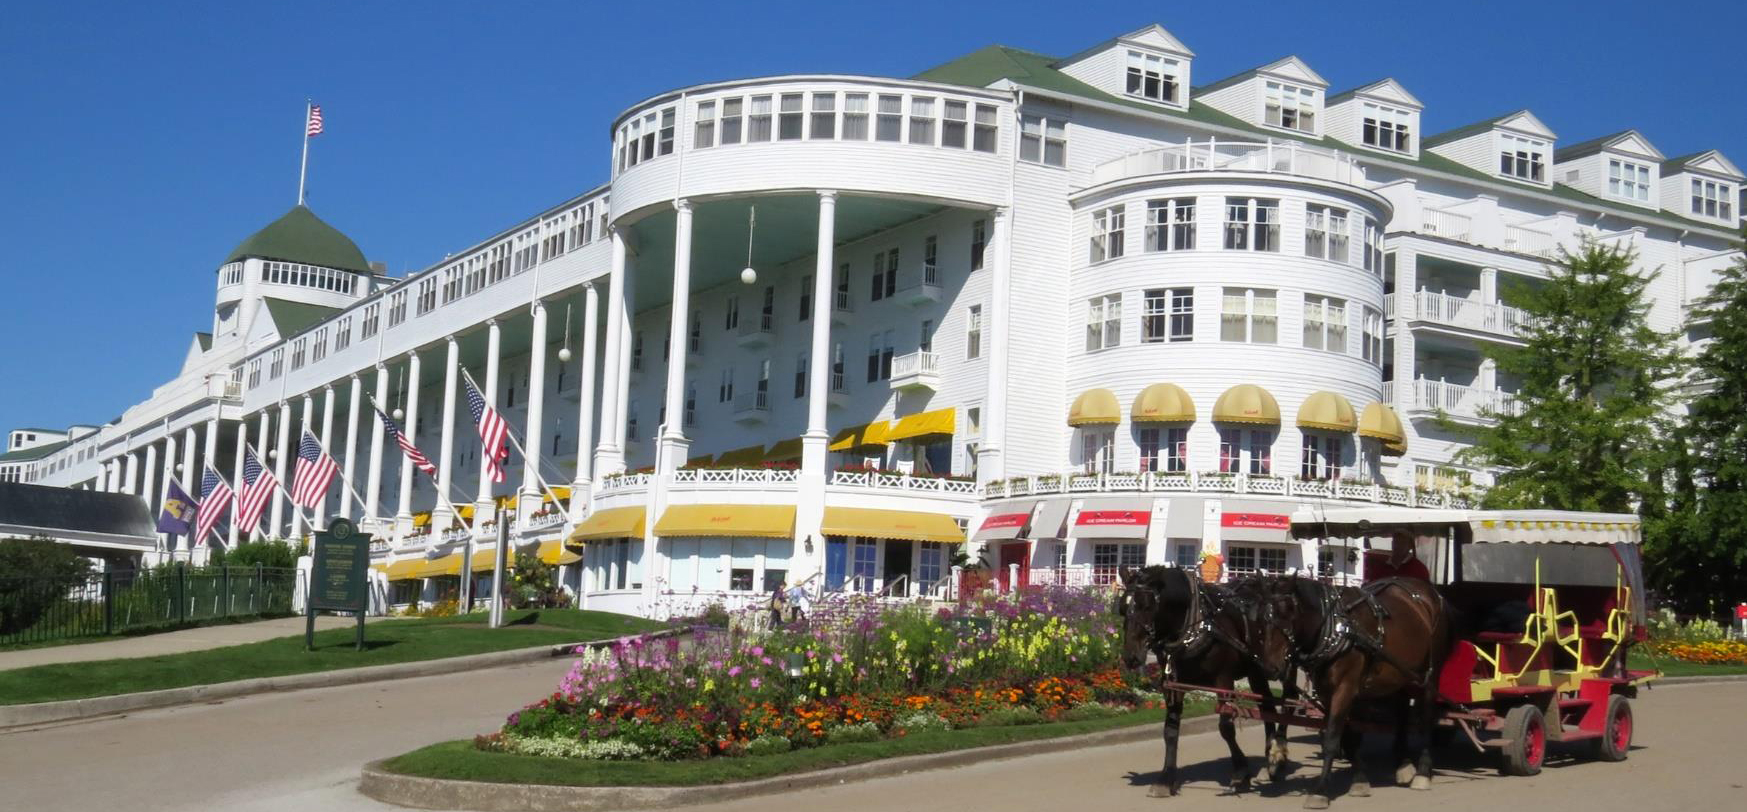 Large white historic hotel with a horse and carriage in front